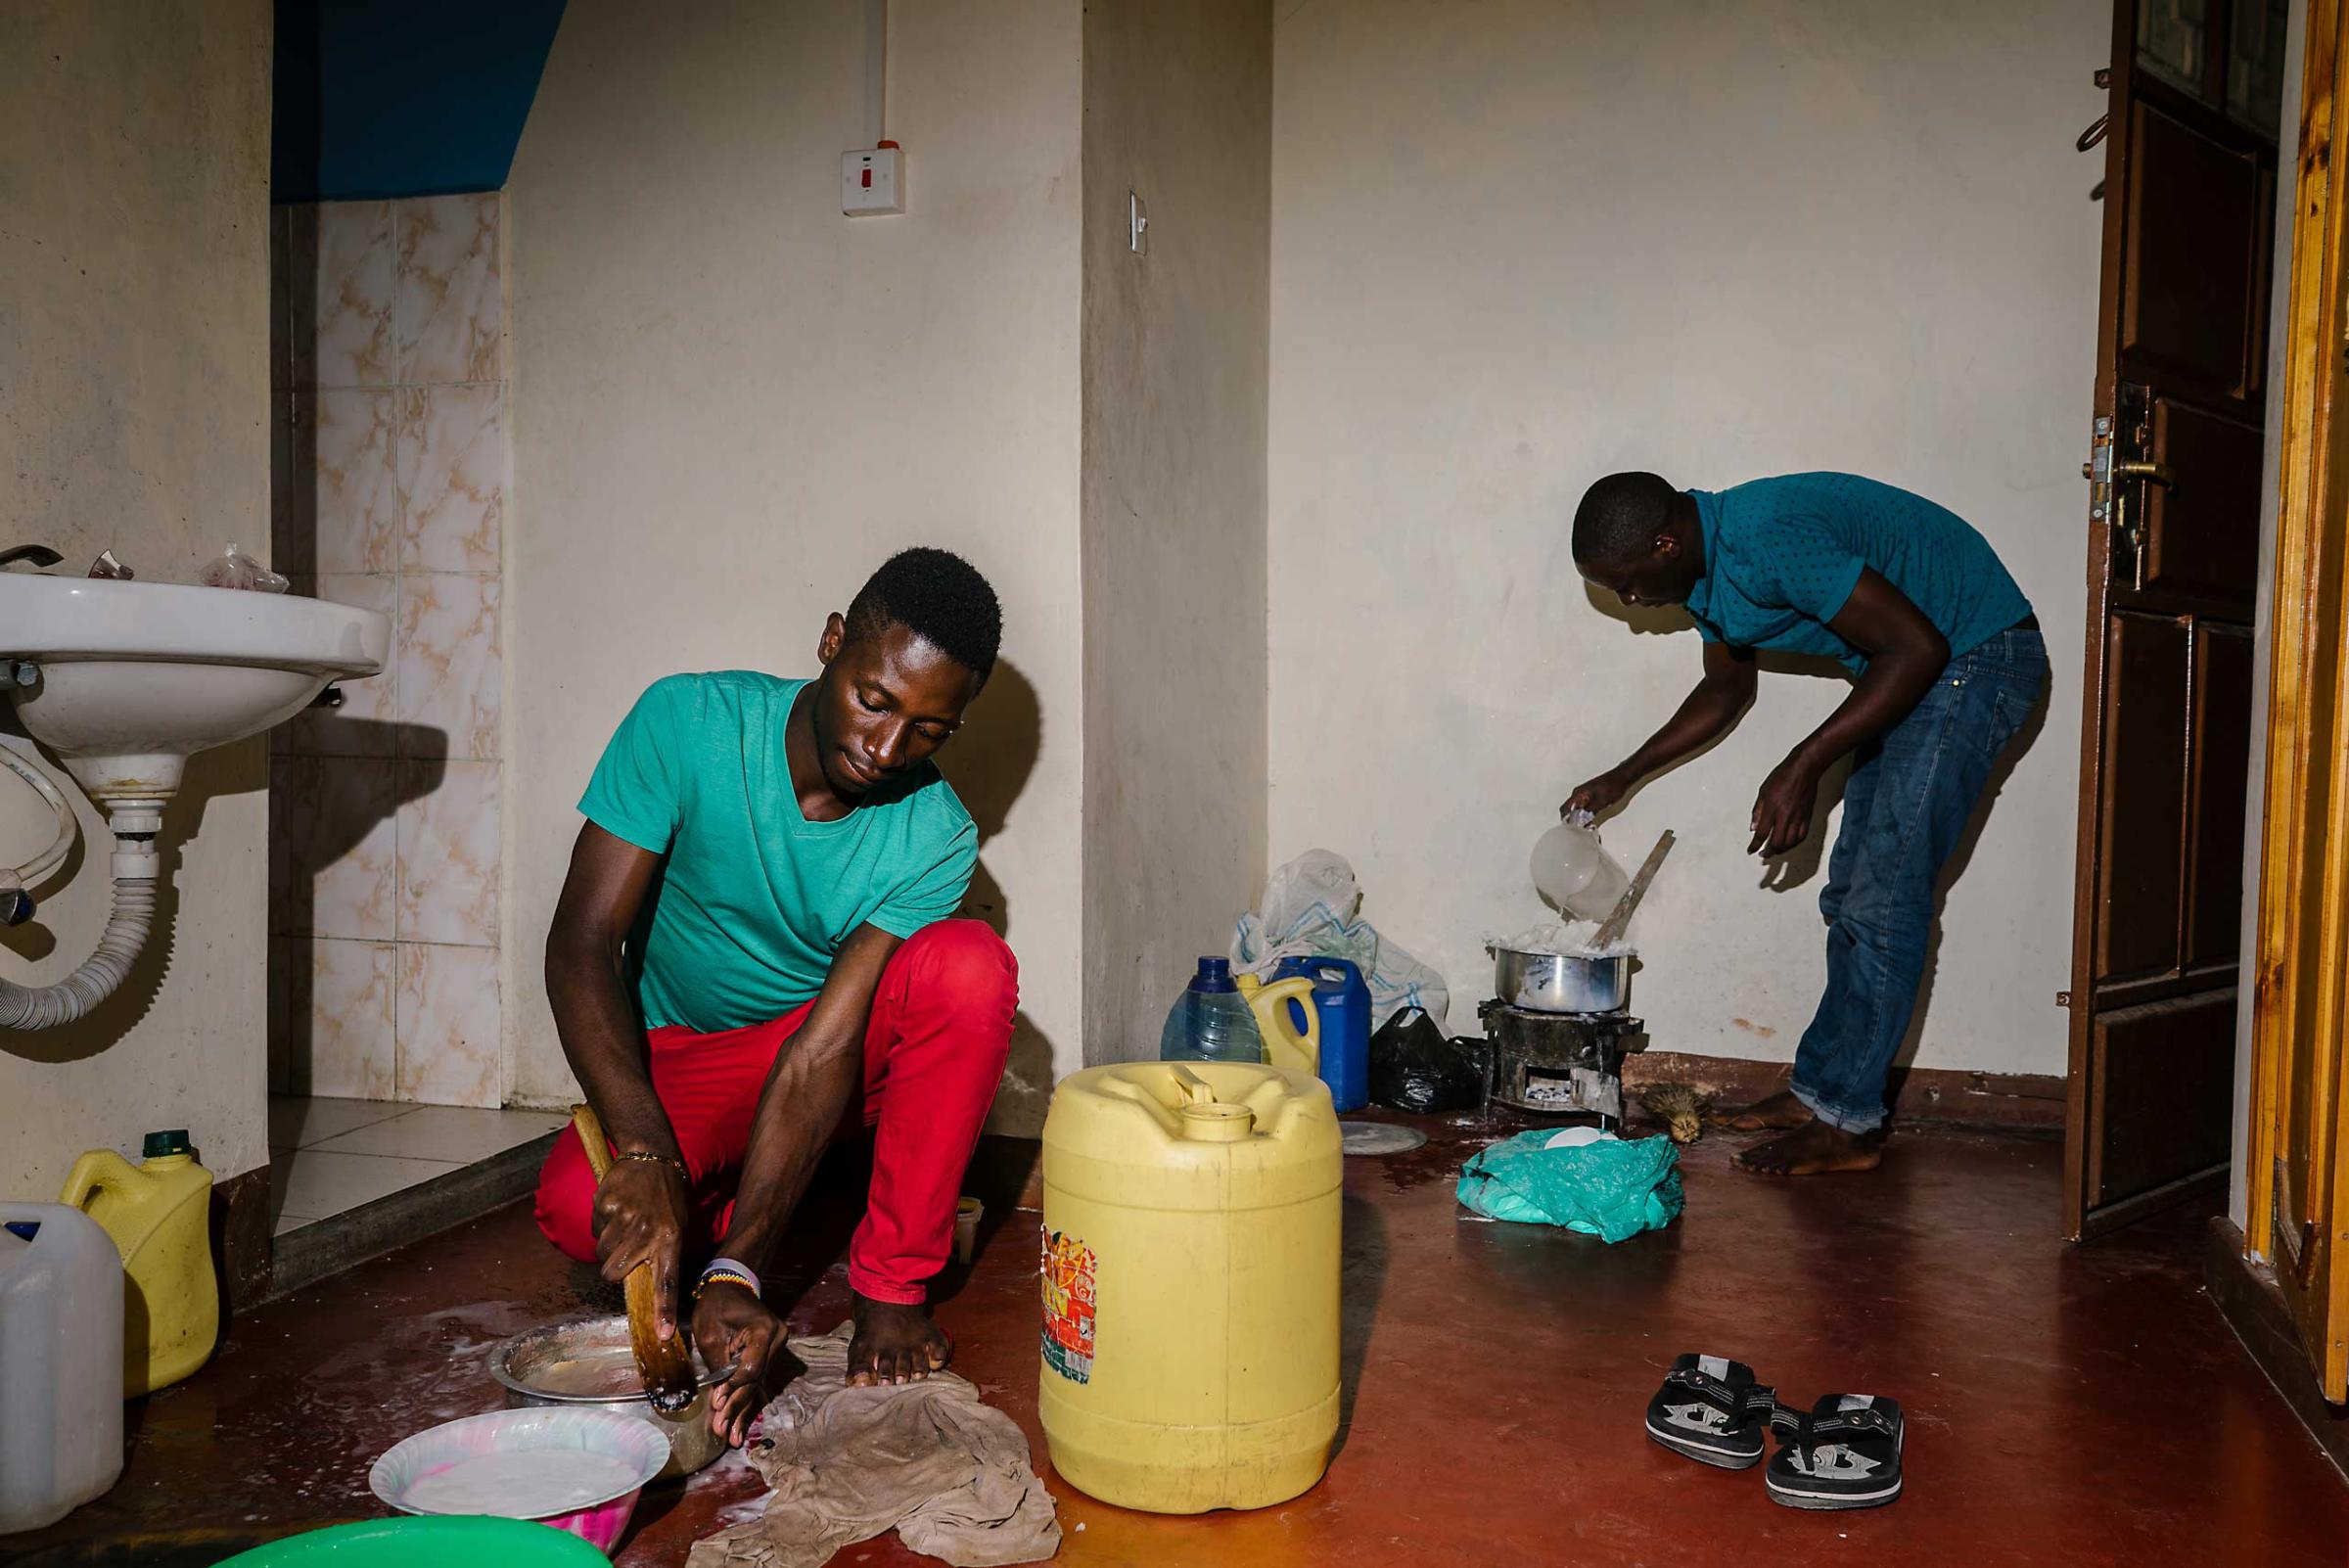 S. and J. prepare food for themselves and others in the house they lived in outside of Nairobi.